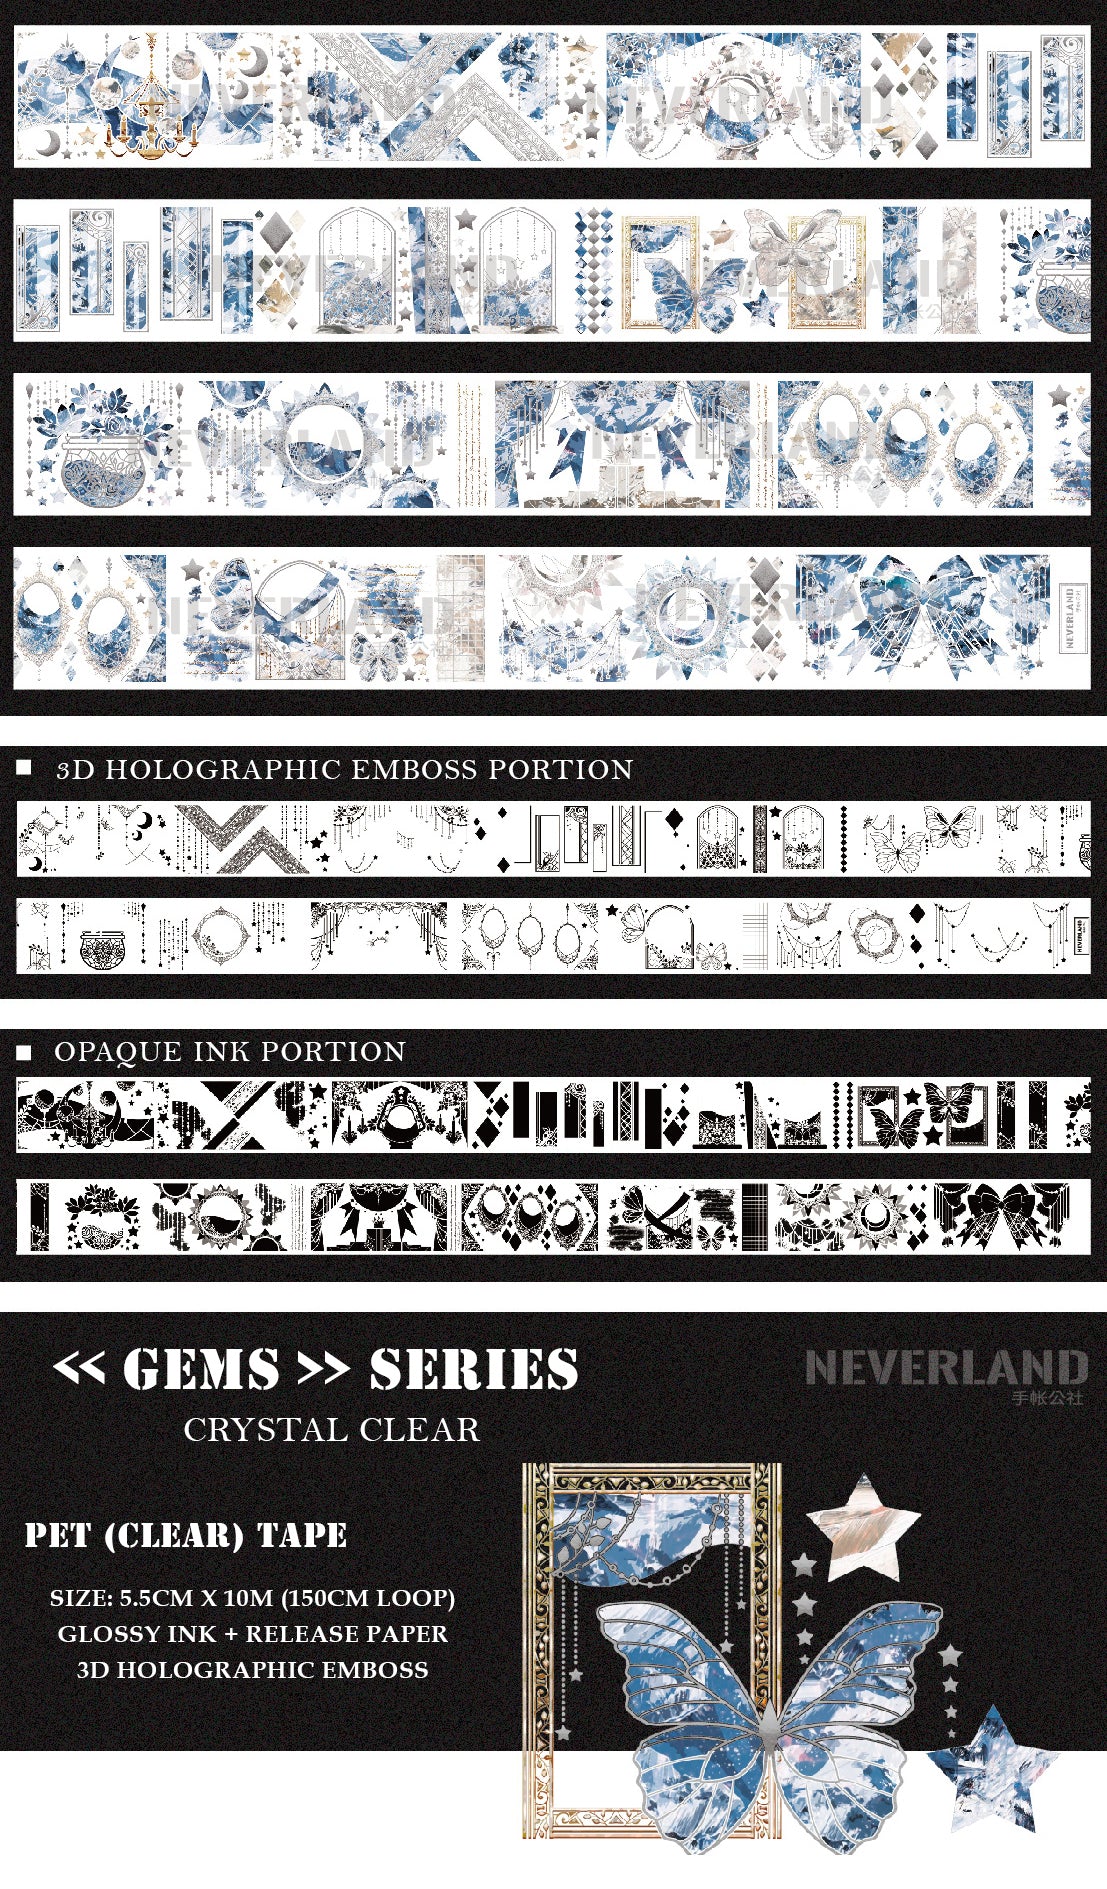 Neverland Clear Tape: Ice Age & Crystal Clear